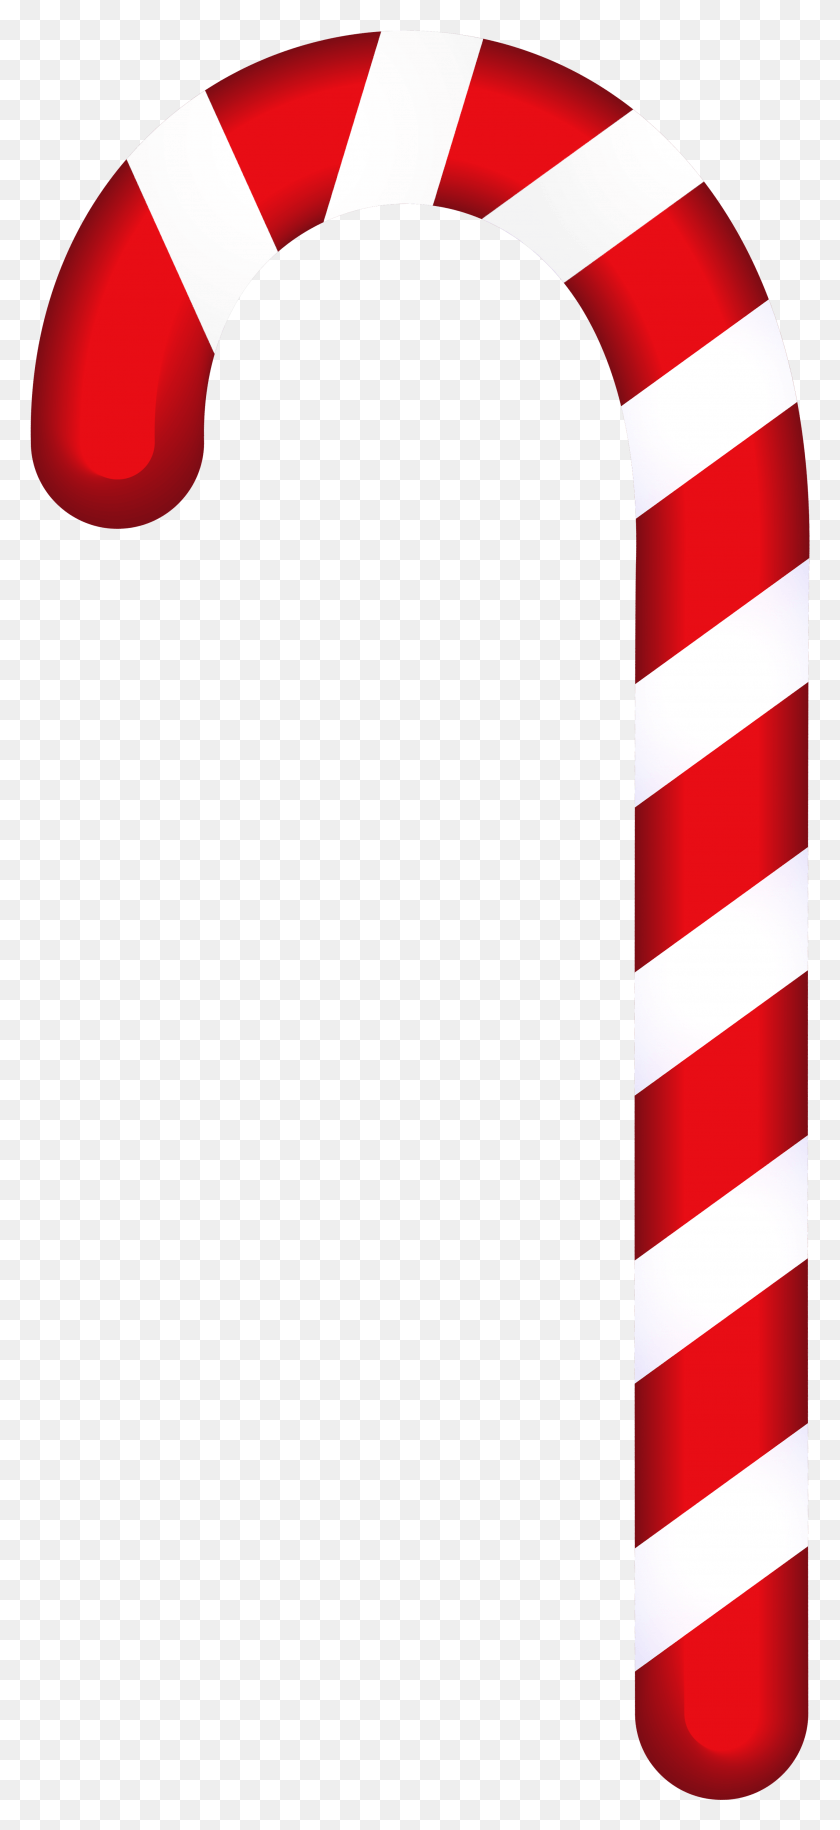 2655x6025 Candy Cane Clip Art Image Candy Cane Clipart, Sweets, Food, Confectionery HD PNG Download